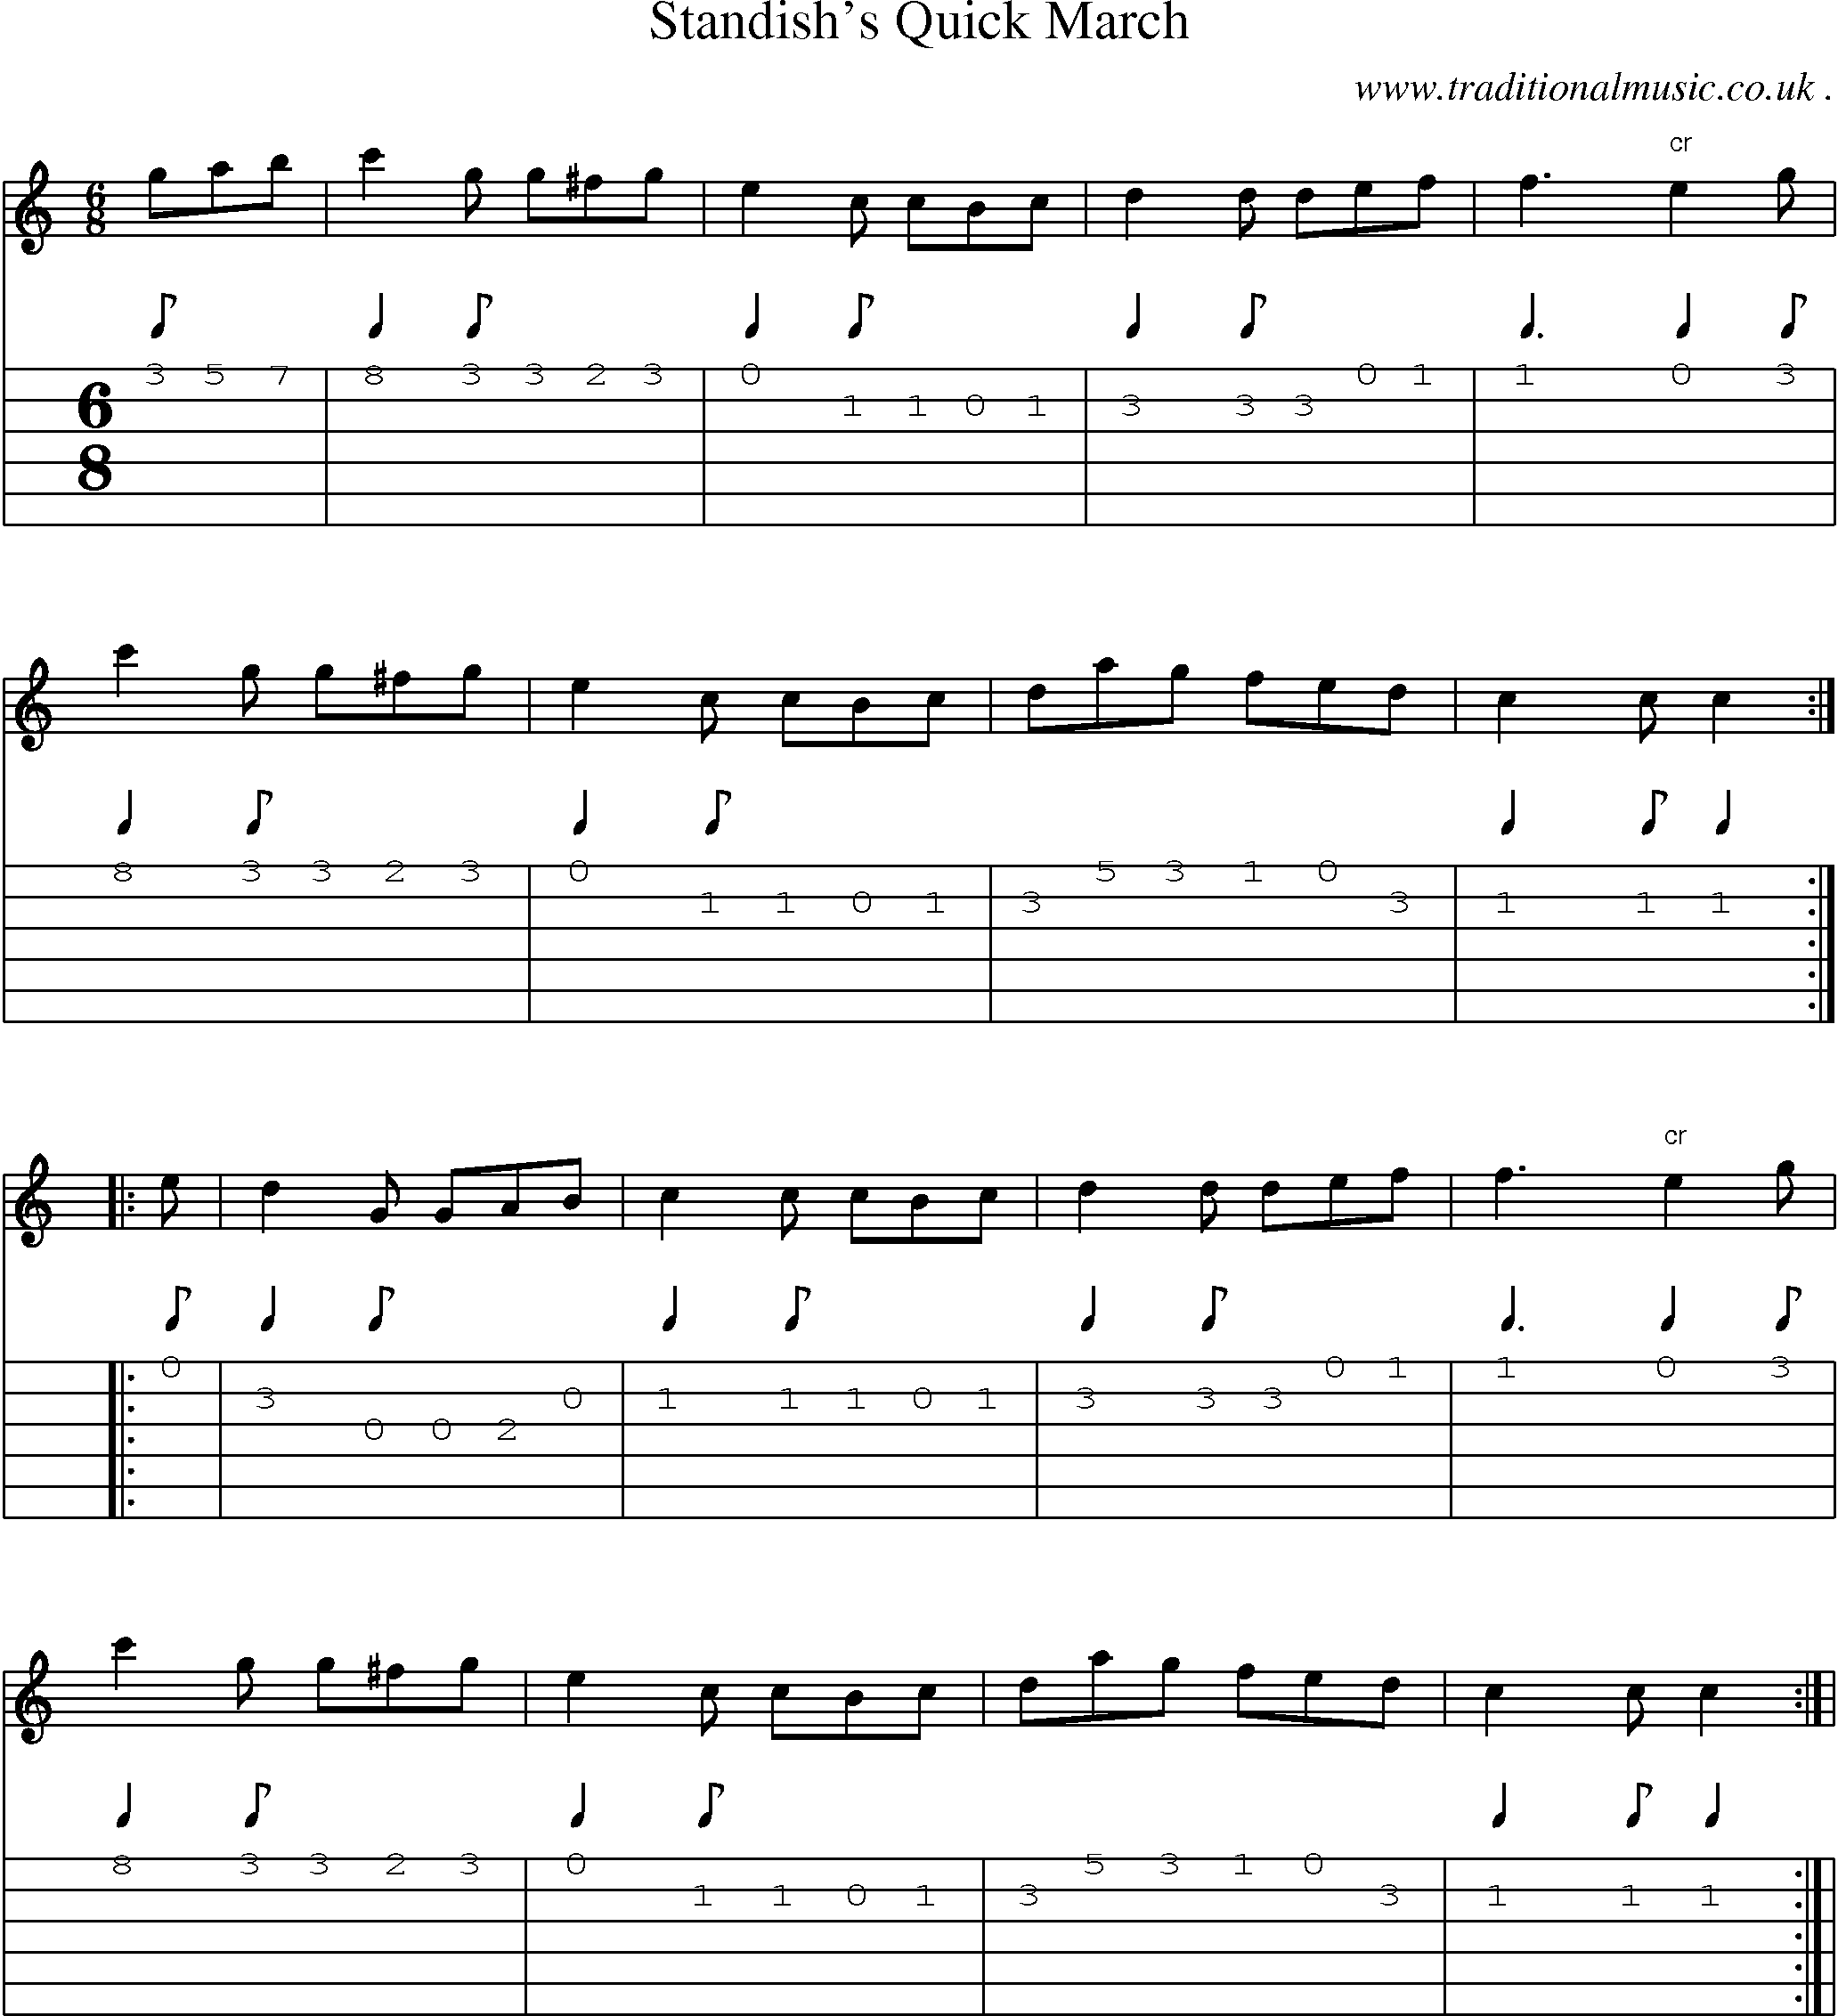 Sheet-Music and Guitar Tabs for Standishs Quick March